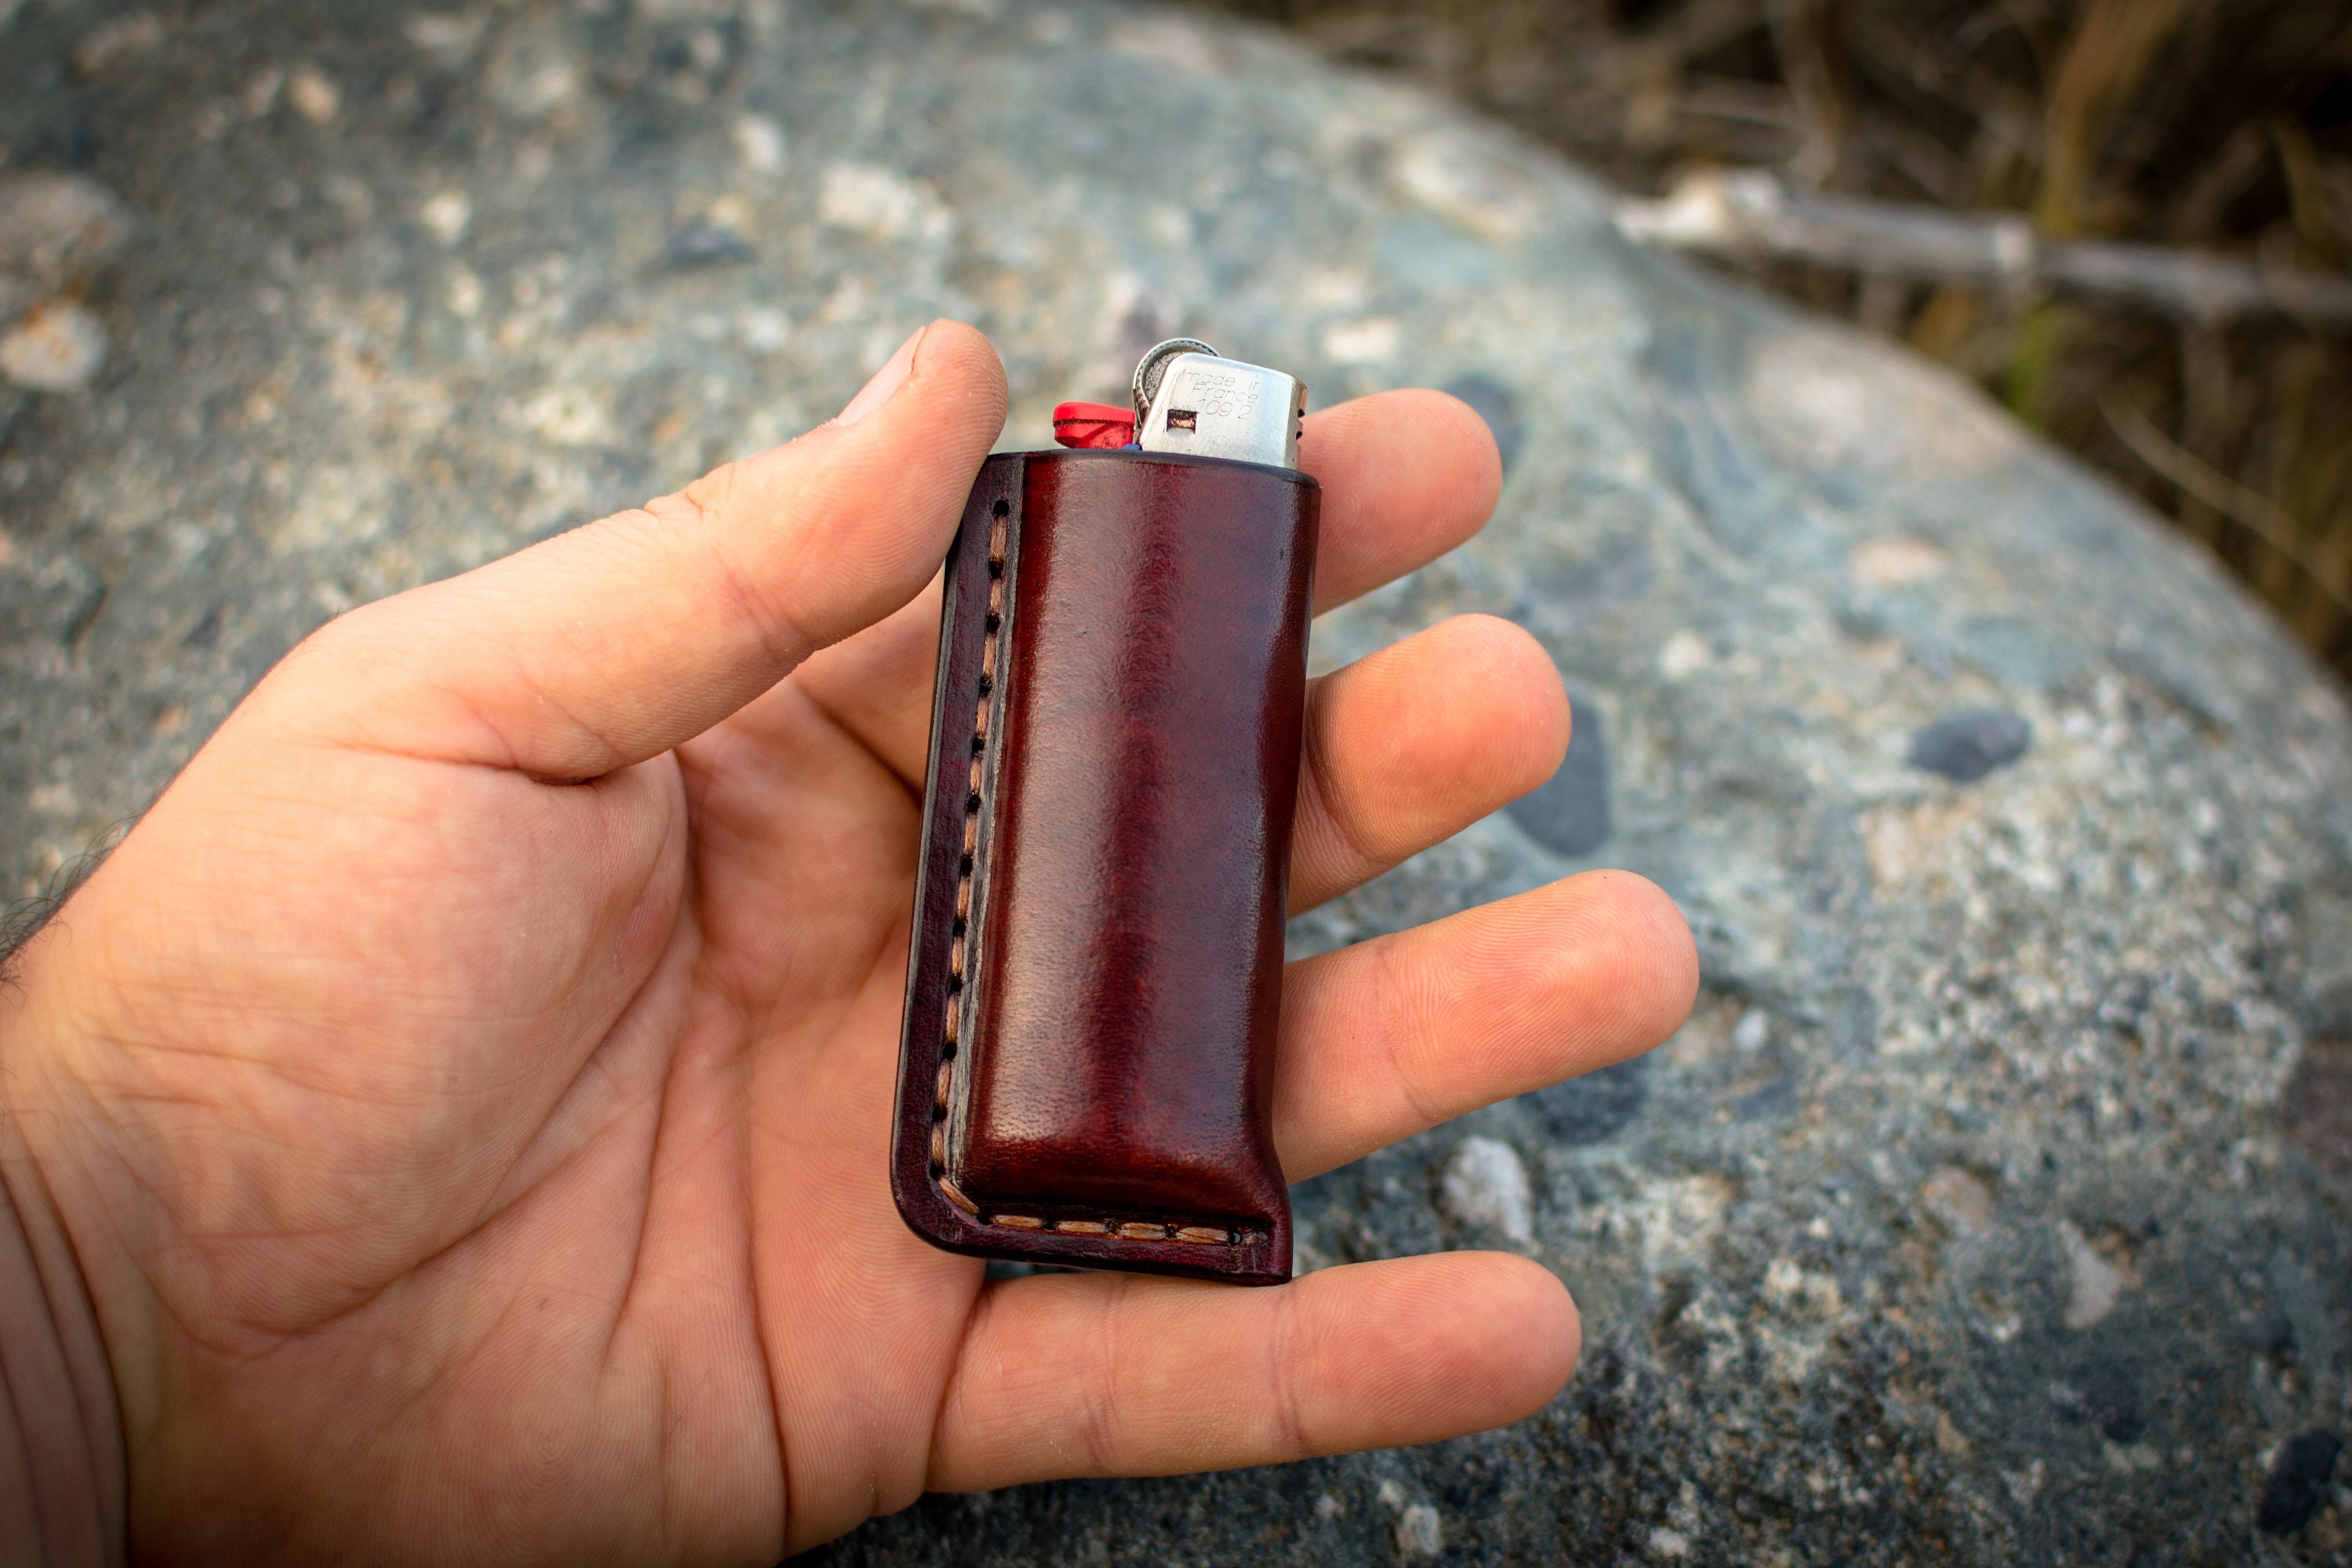 Made By Nola - Louis Vuitton Bic Lighter Sleeve – Stoked CT